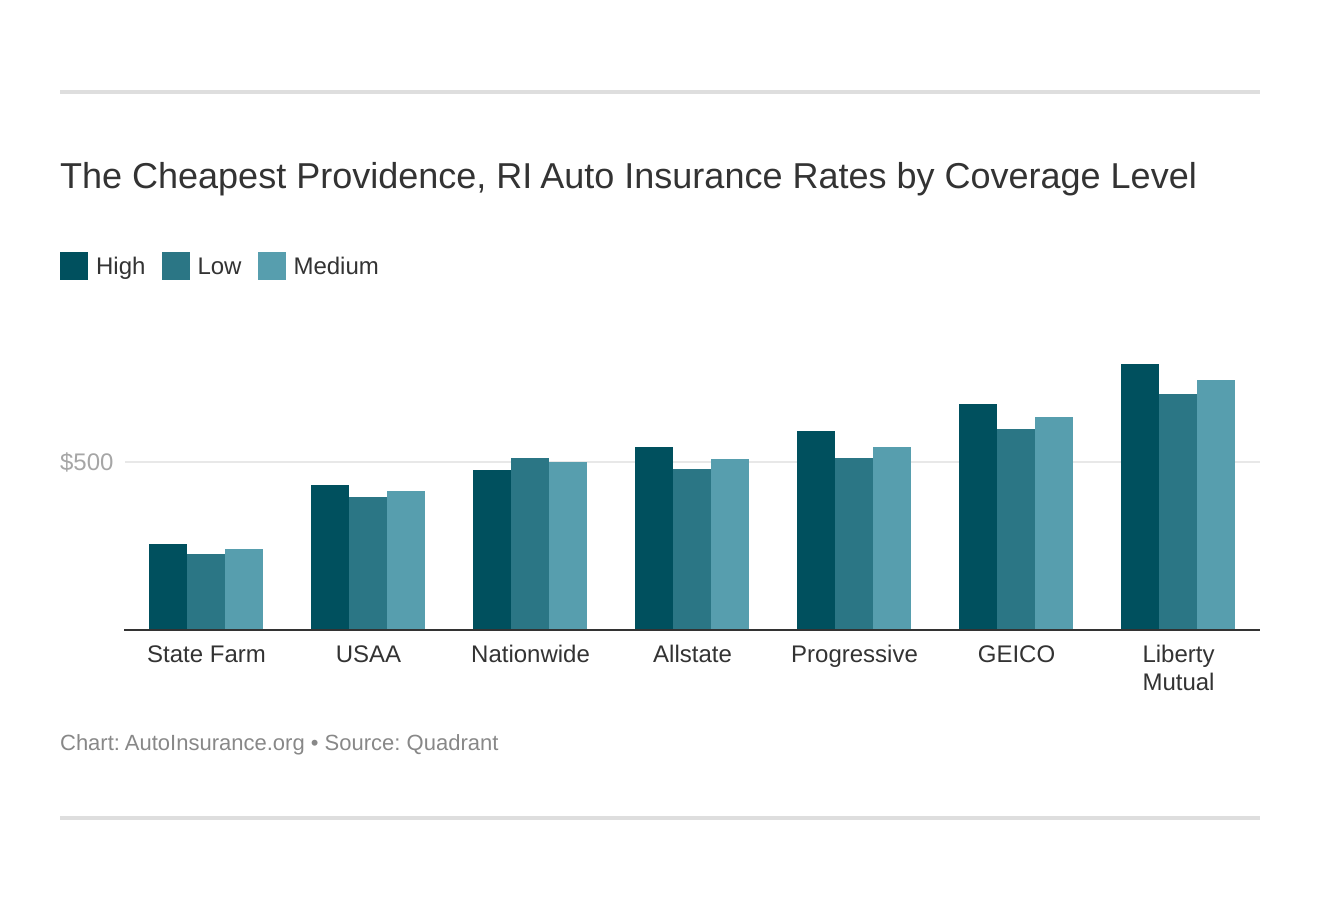 The Cheapest Providence, RI Auto Insurance Rates by Coverage Level